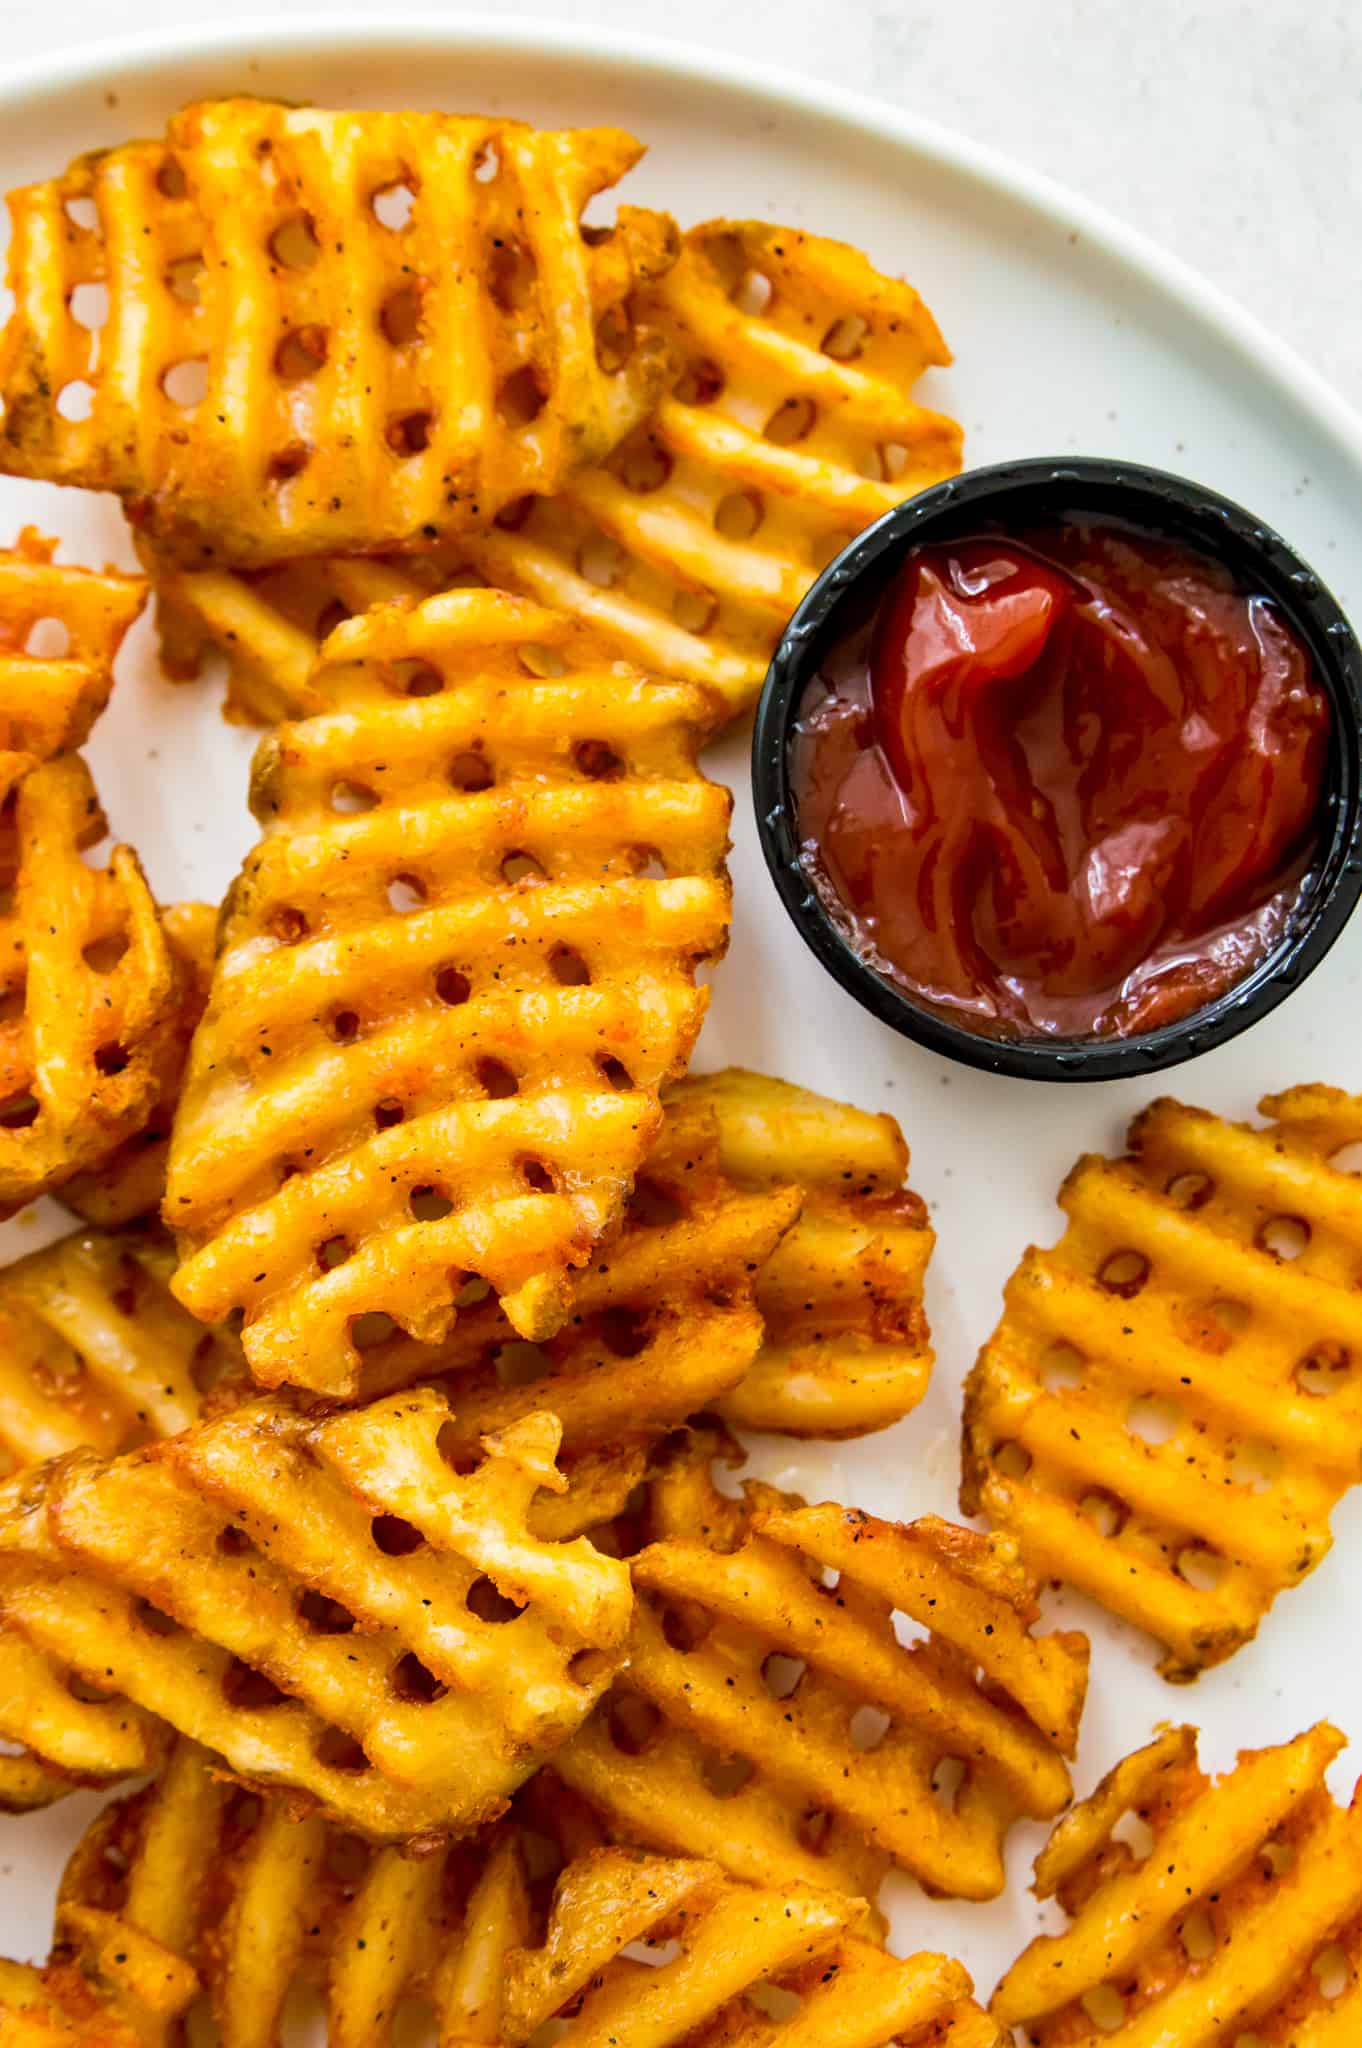 A plate of waffles fries with a side of ketchup.